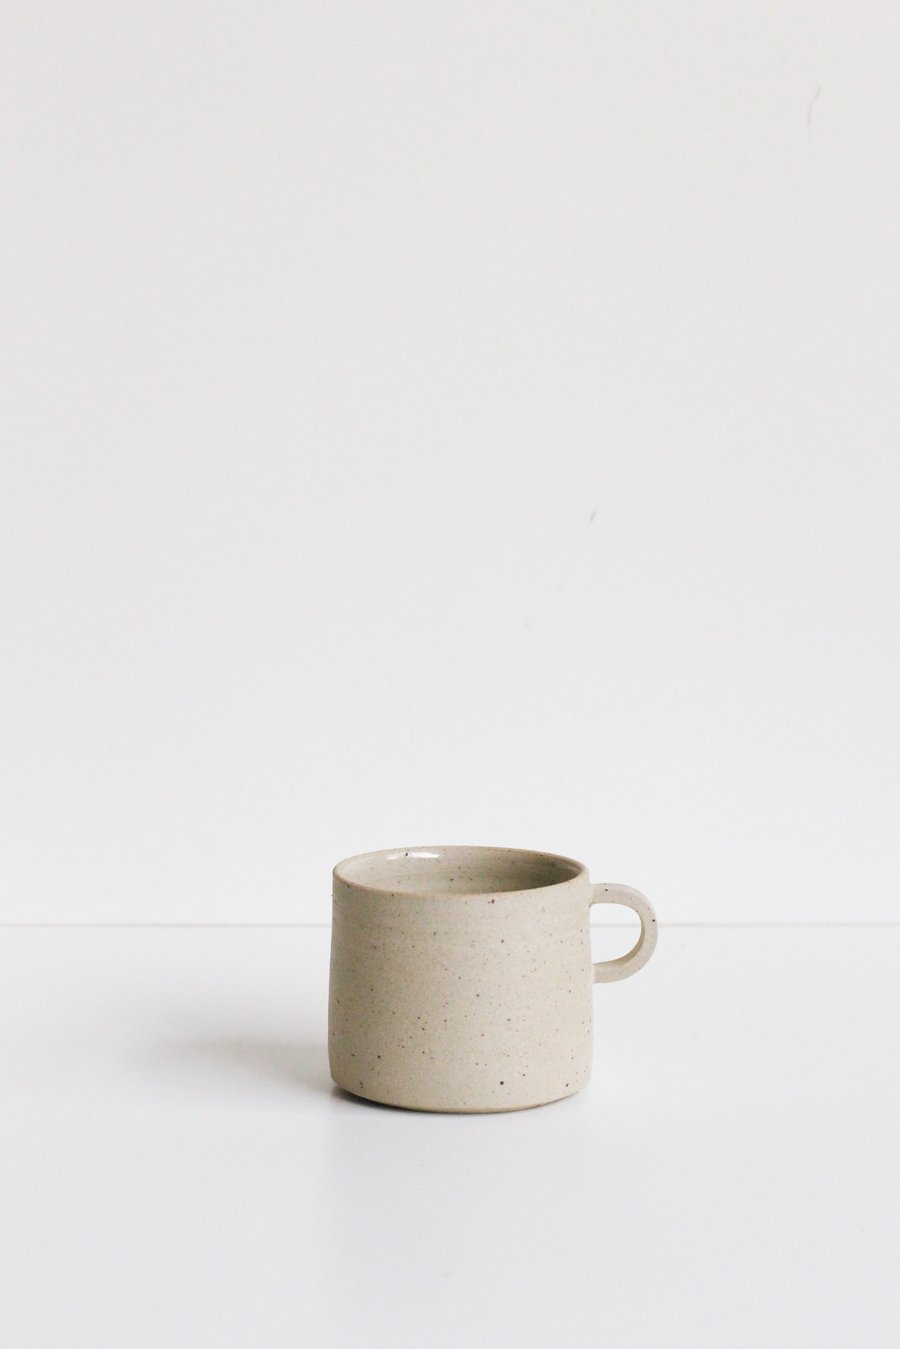 Image of Cup / Fleck